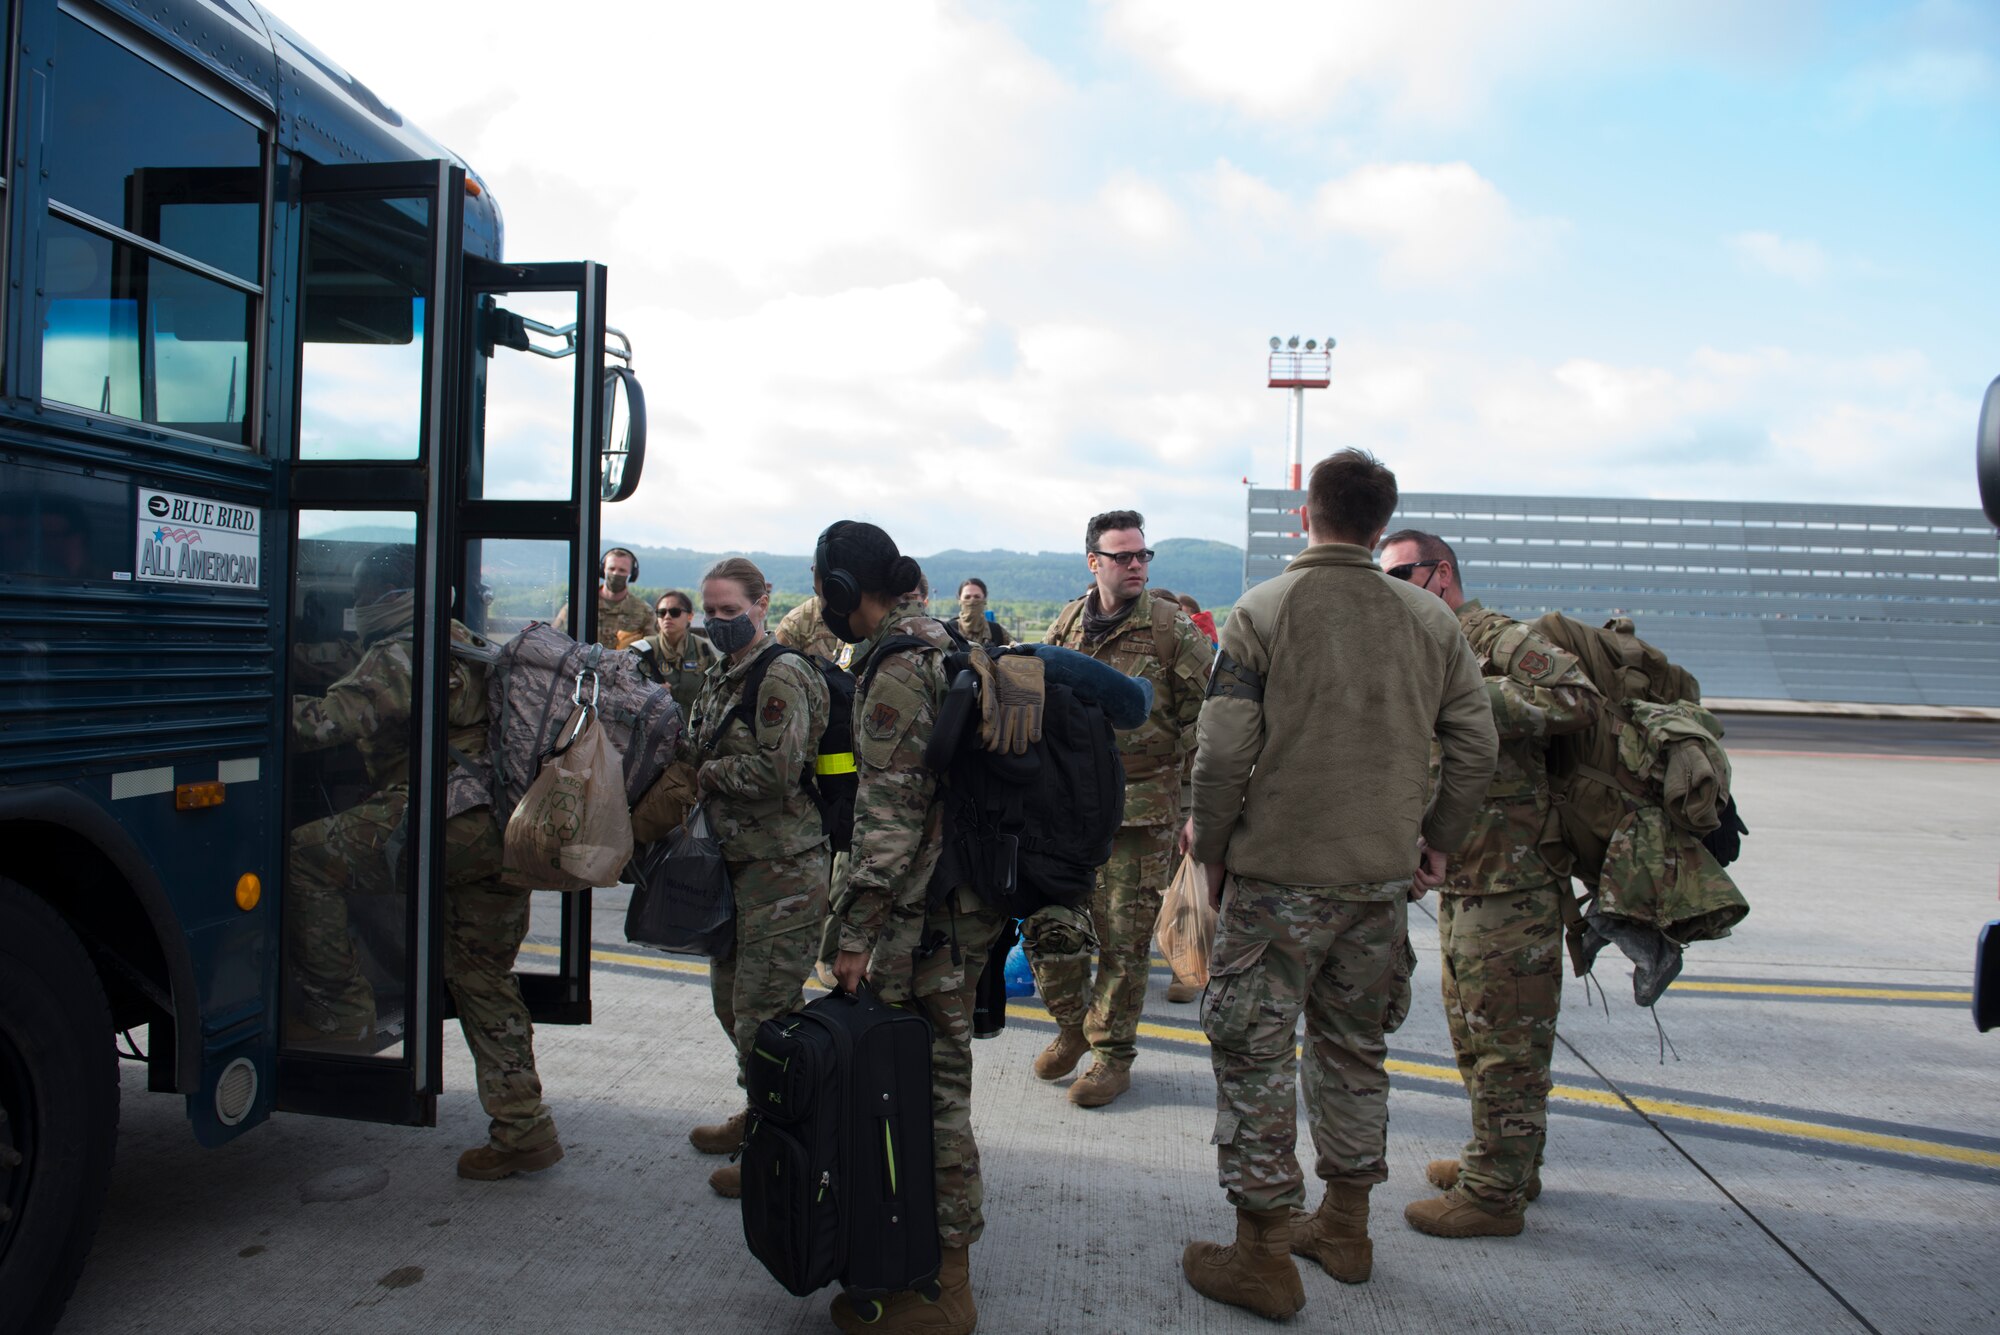 A photo of Airmen stepping onto a bus.